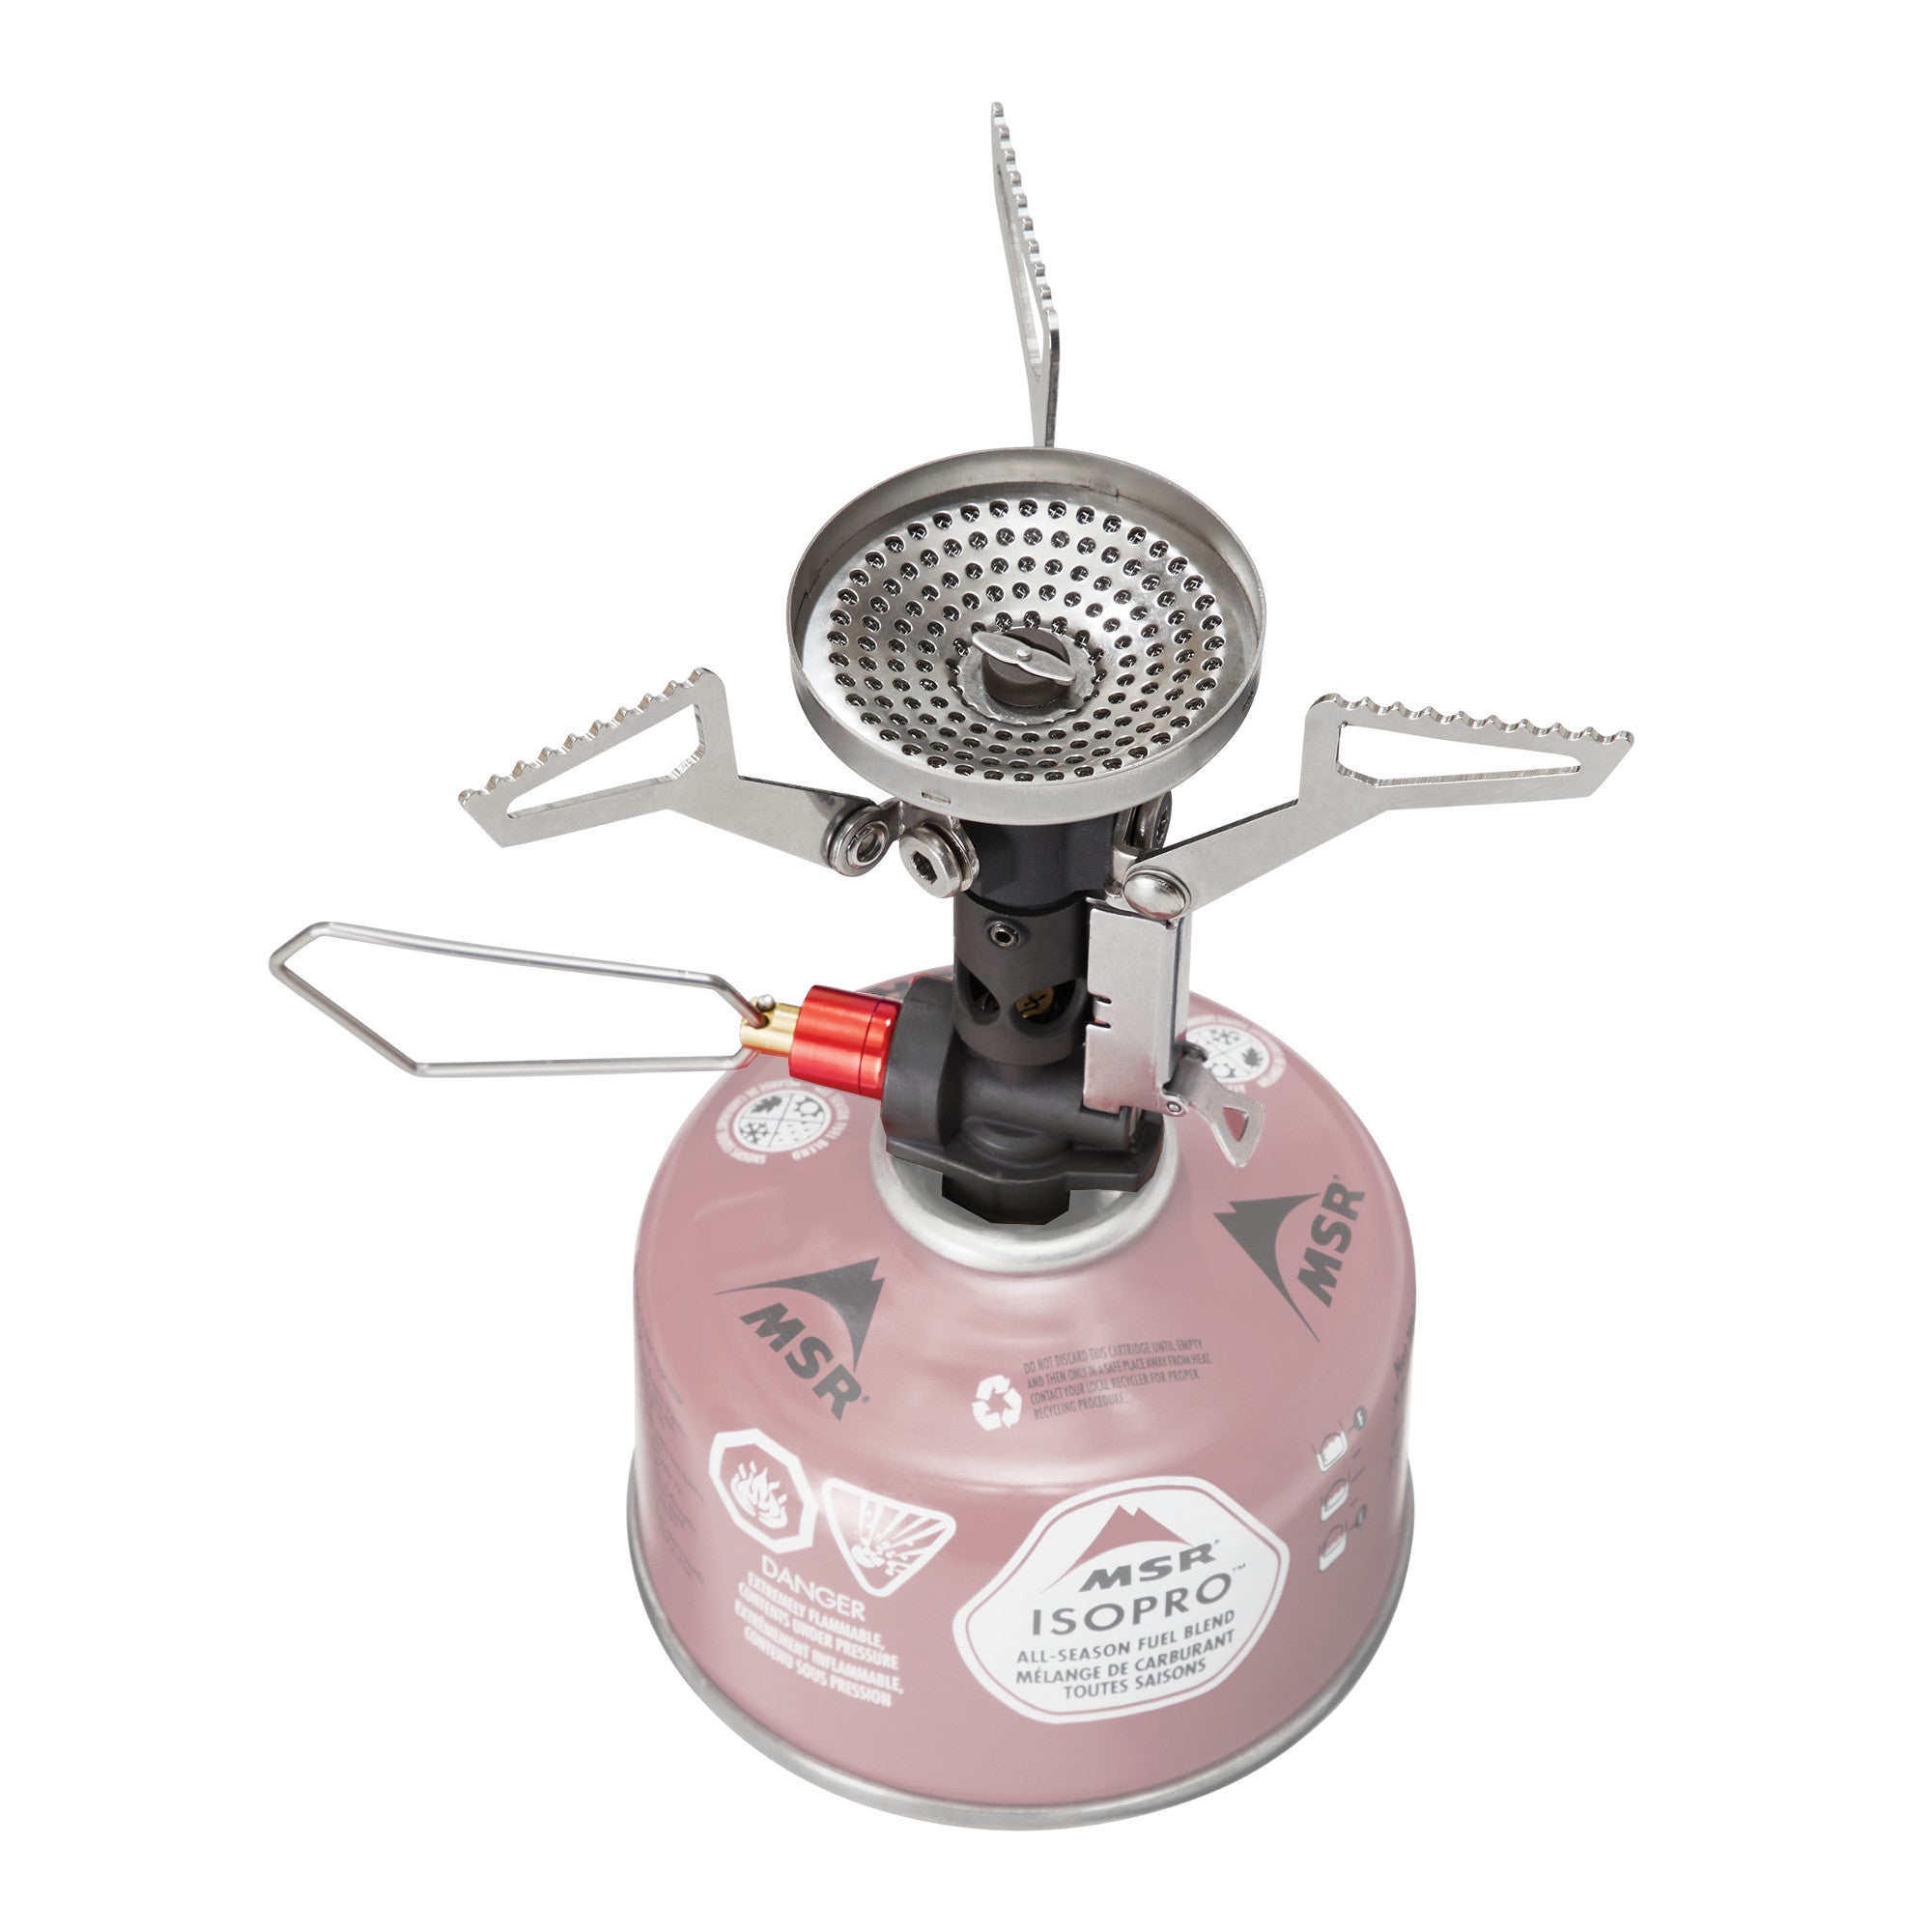 MSR Pocket Rocket Deluxe camping stove, front view 